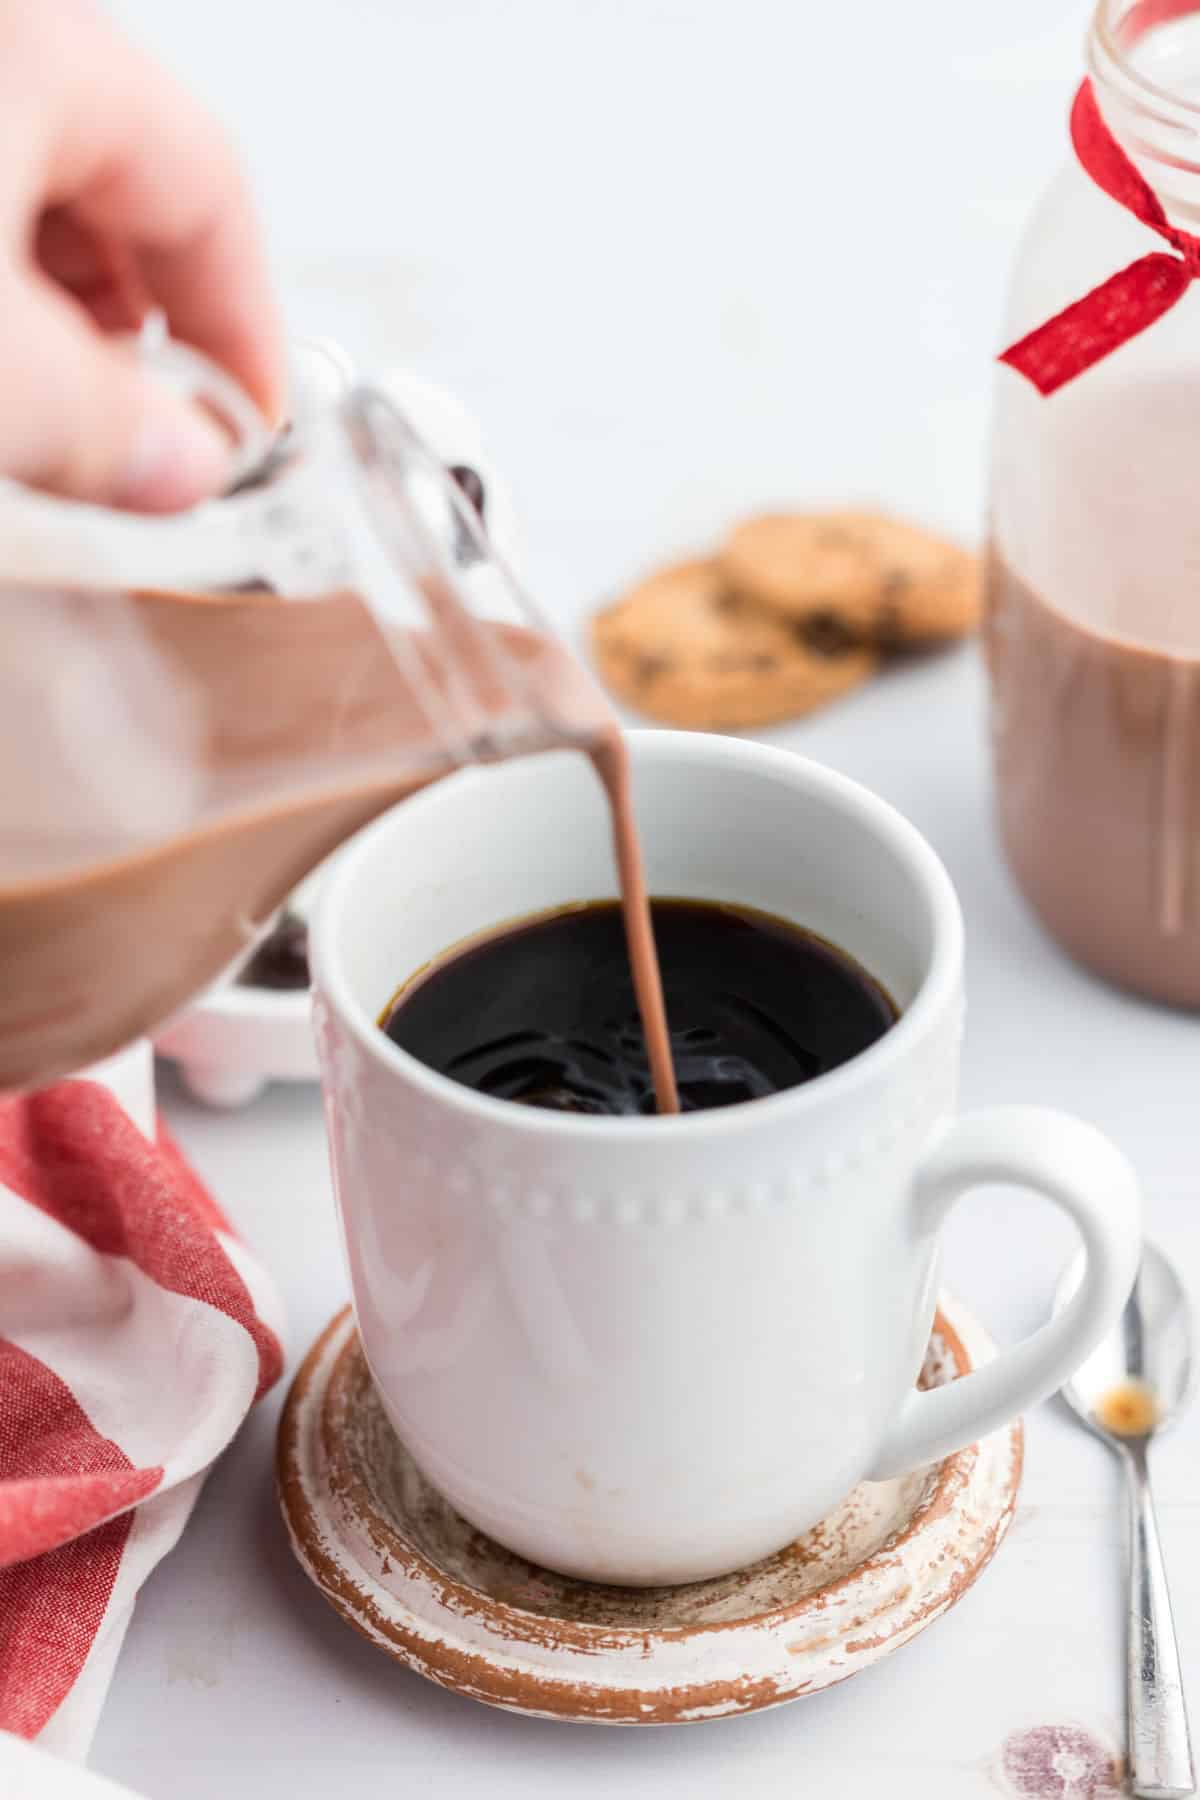 Chocolate chip coffee creamer being poured into hot black coffee.